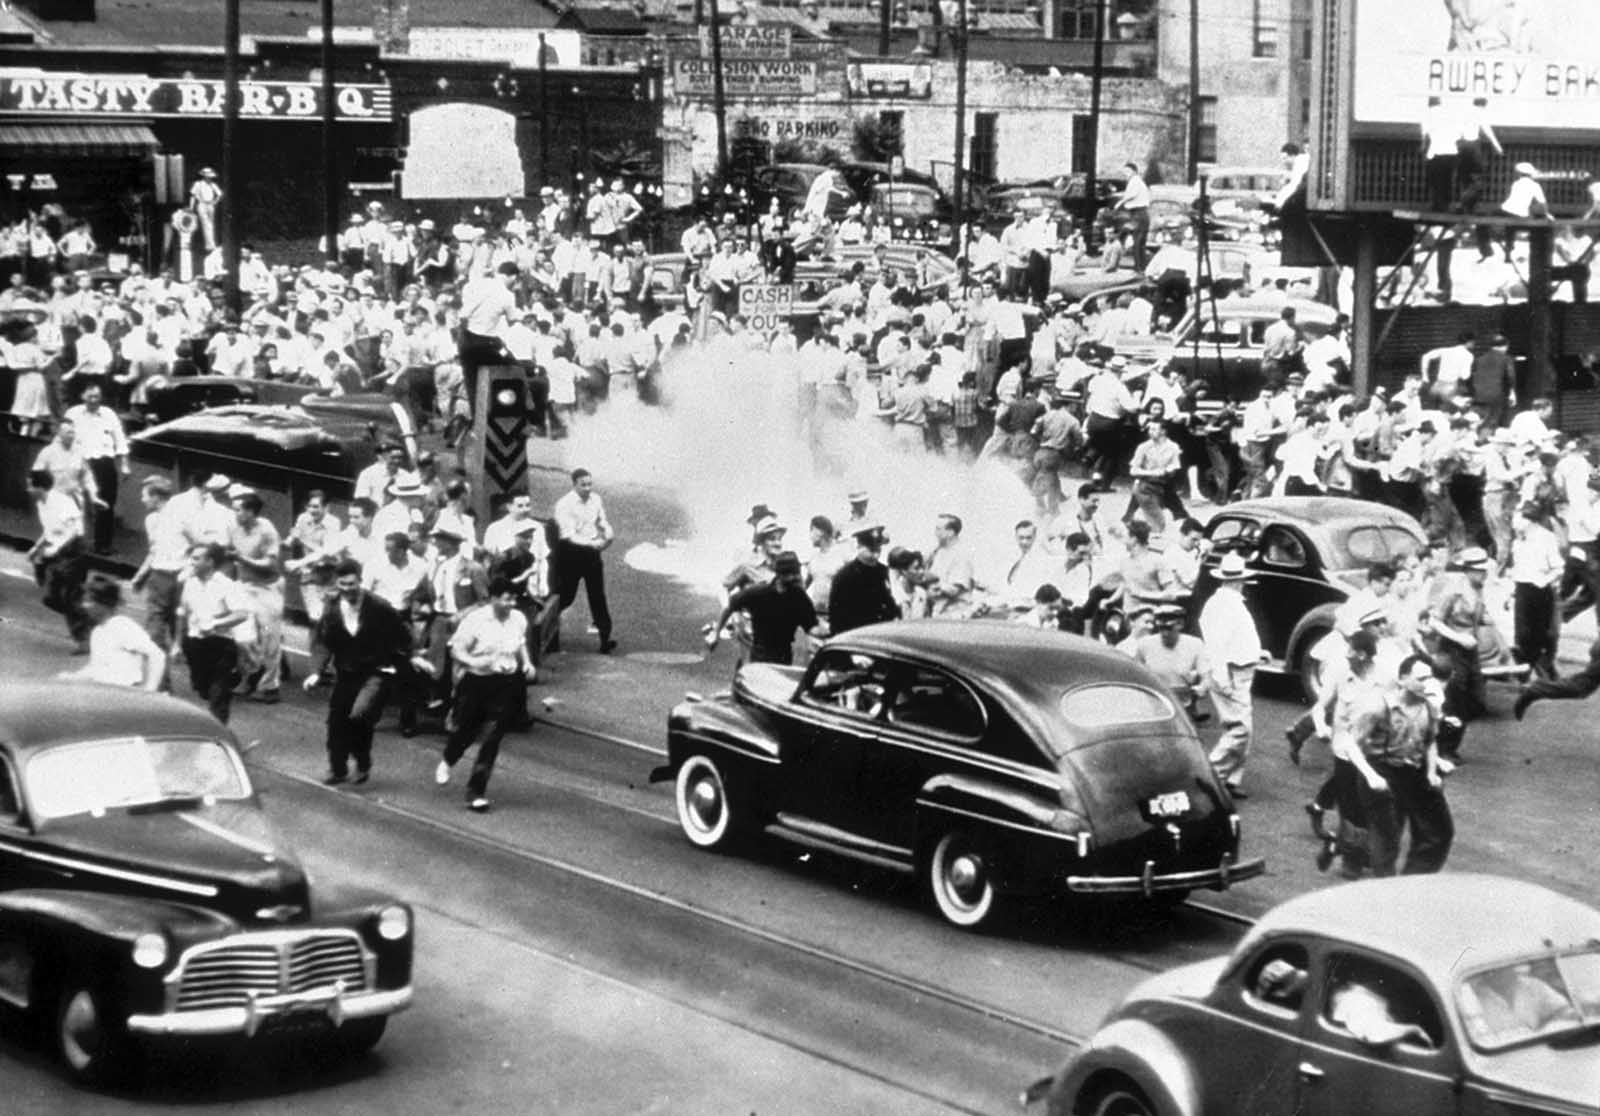 Police use tear gas to disperse a crowd gathered on the main street of Detroit, Michigan, in an effort to halt race rioting on June 21, 1943.